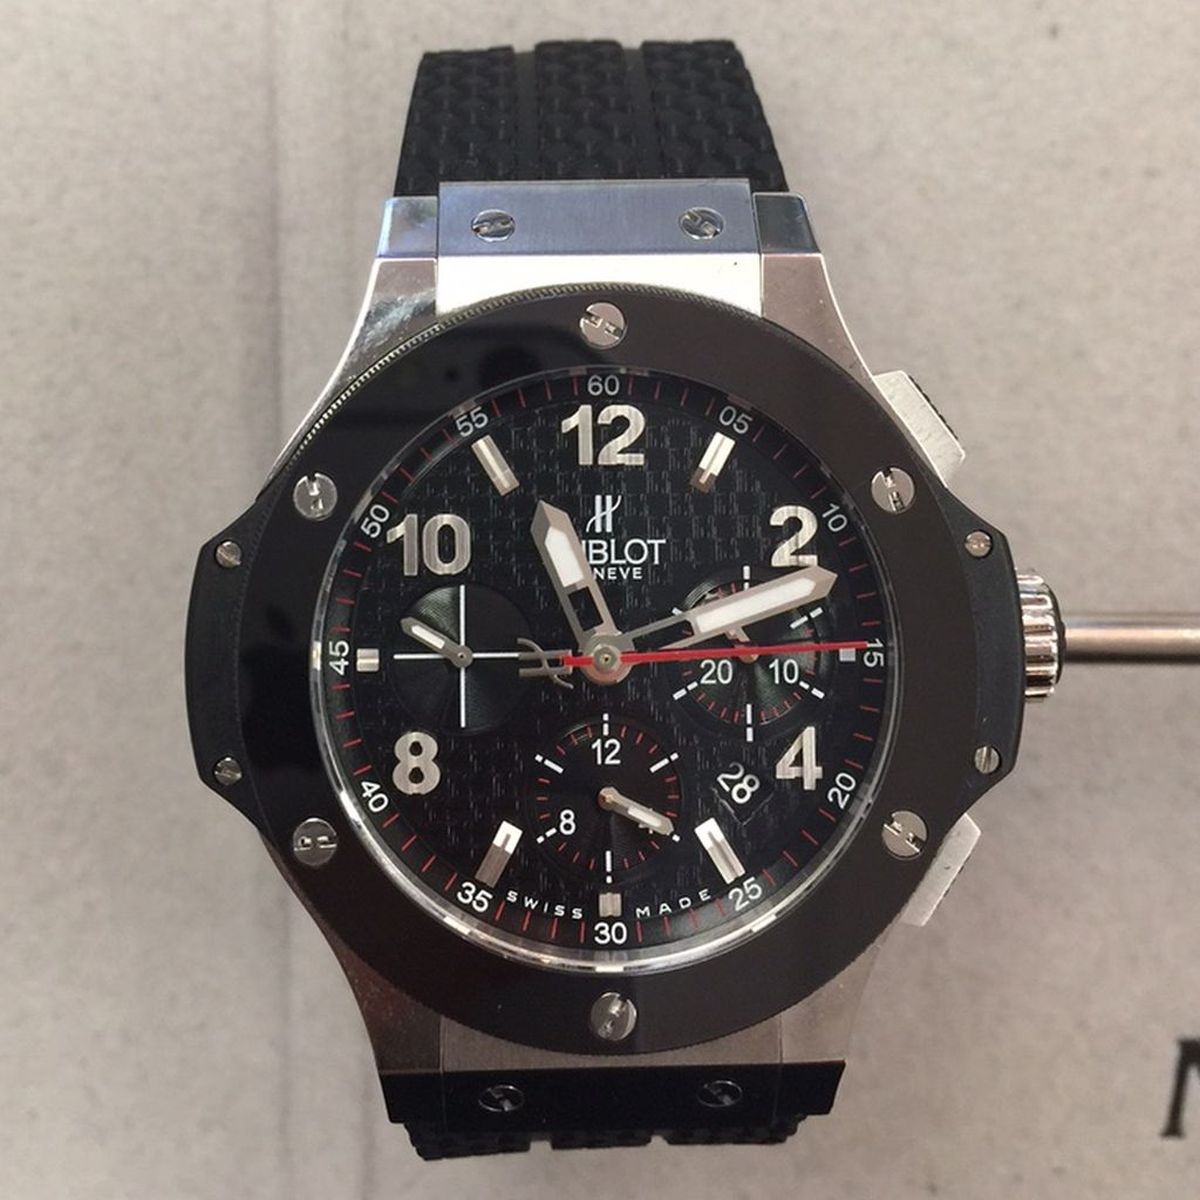 Why the Hublot Watch is a Popular Gift